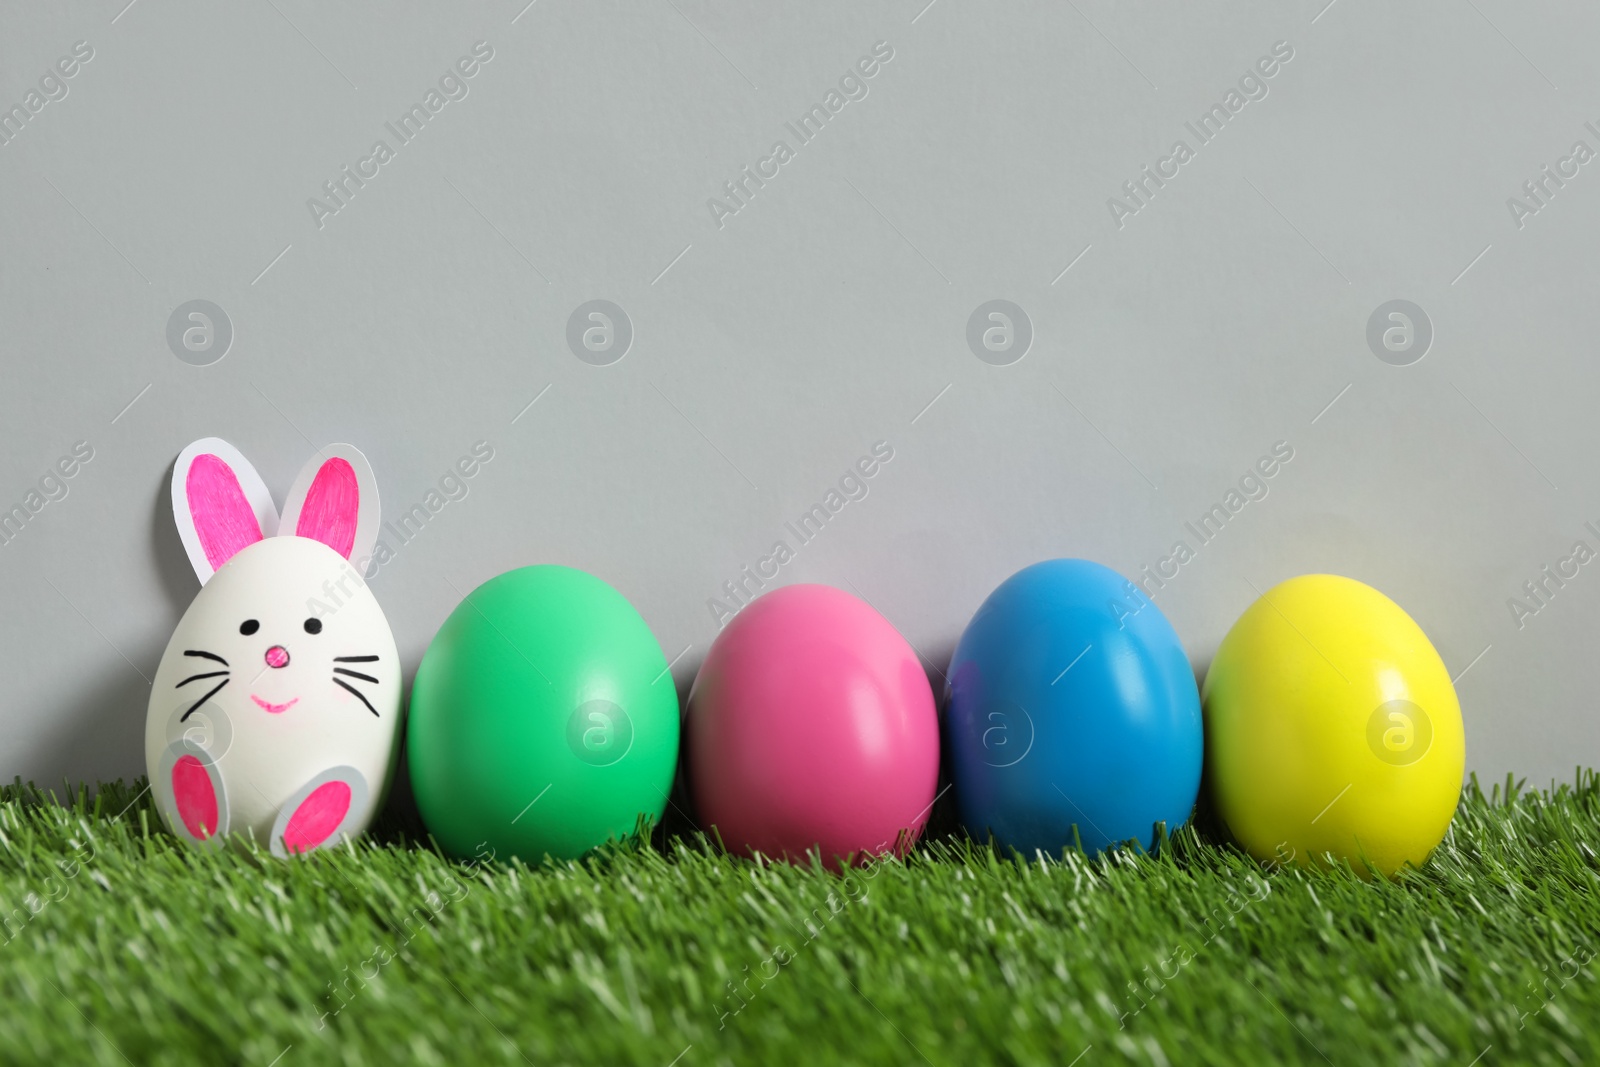 Photo of Bright eggs and white one as Easter bunny on green grass against grey background